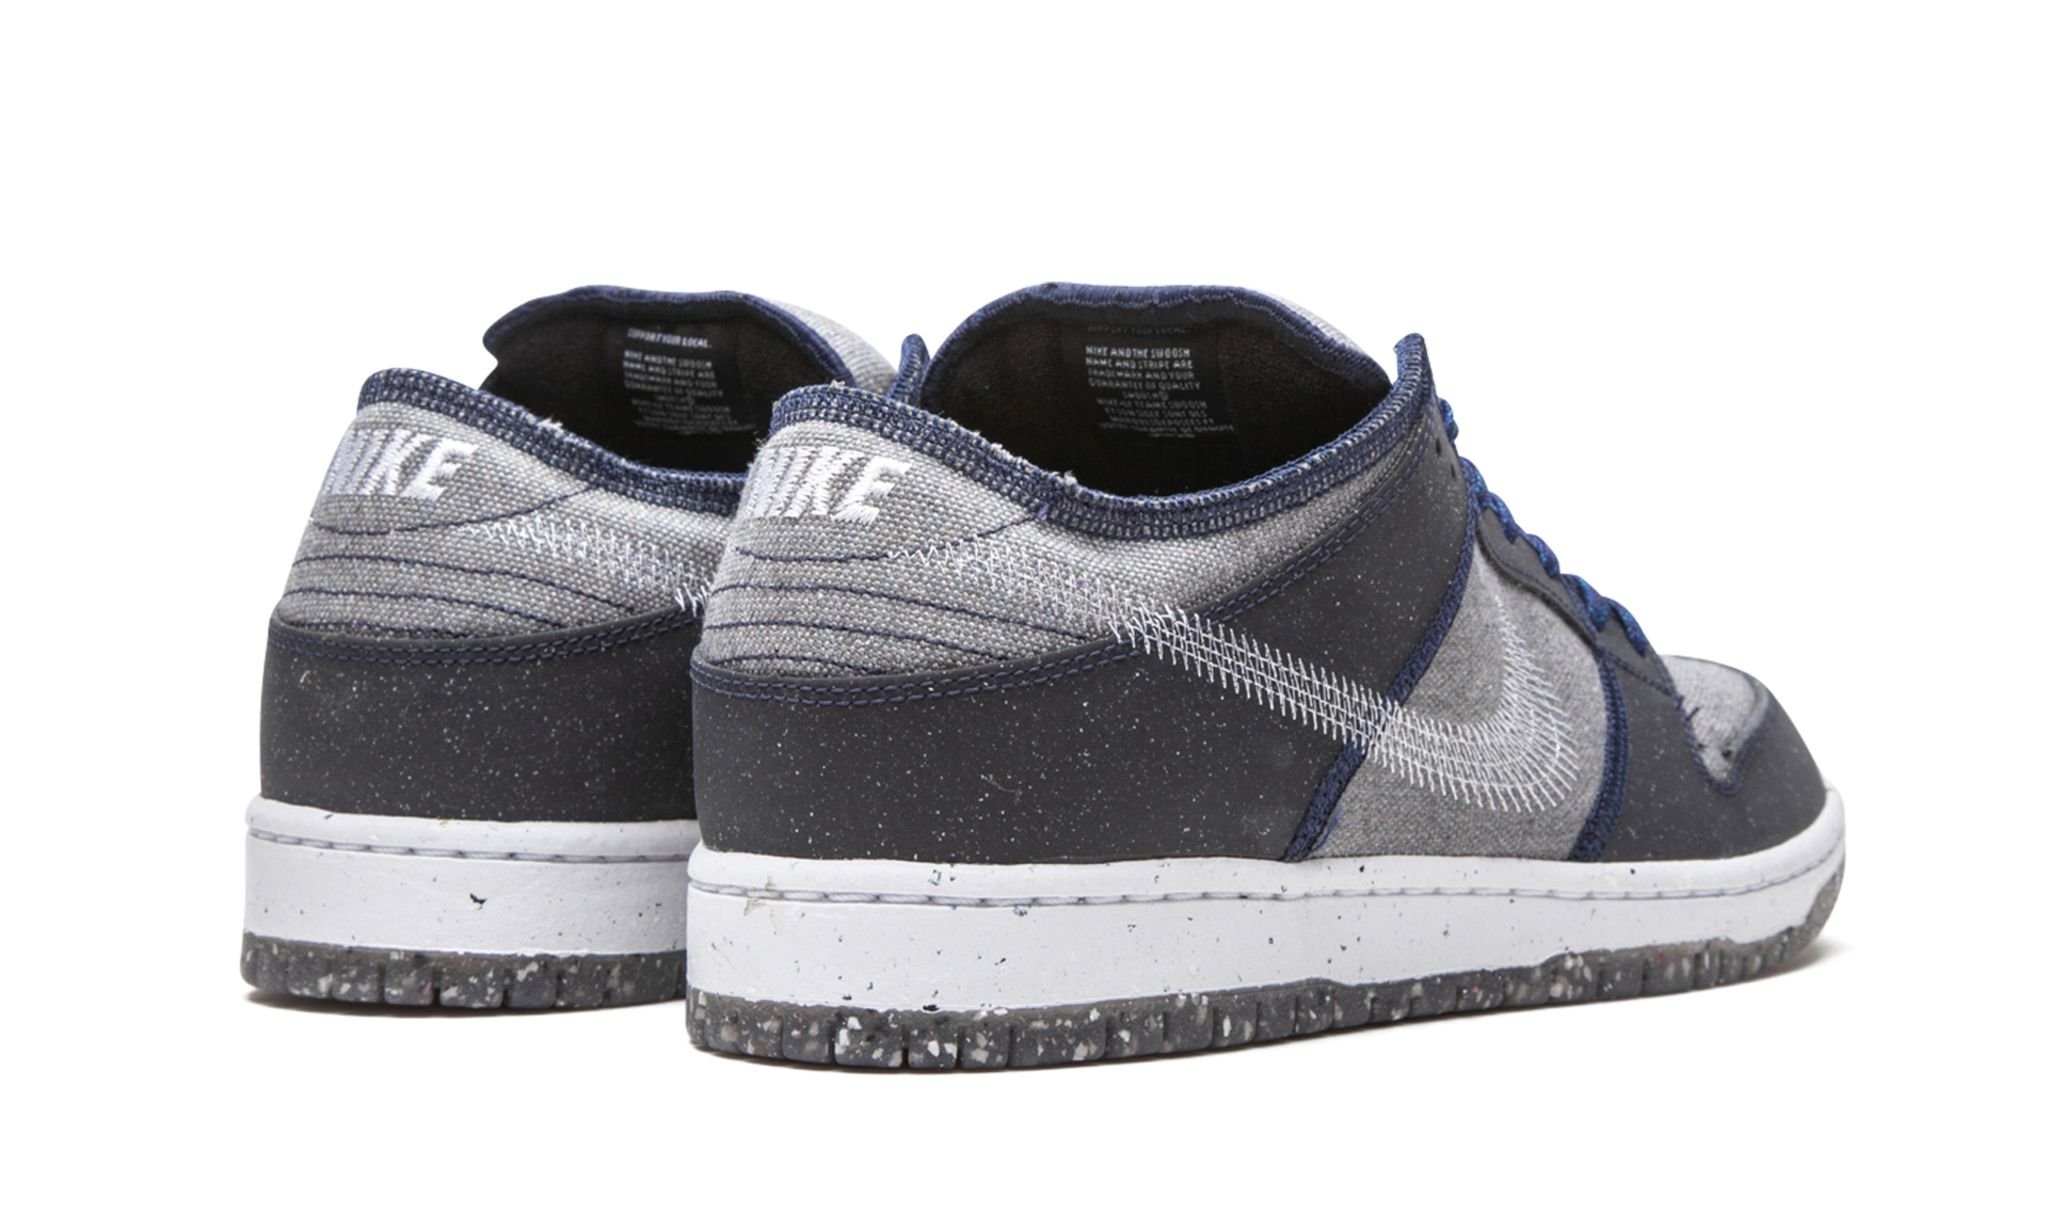 SB Dunk Low "Crater" - 3